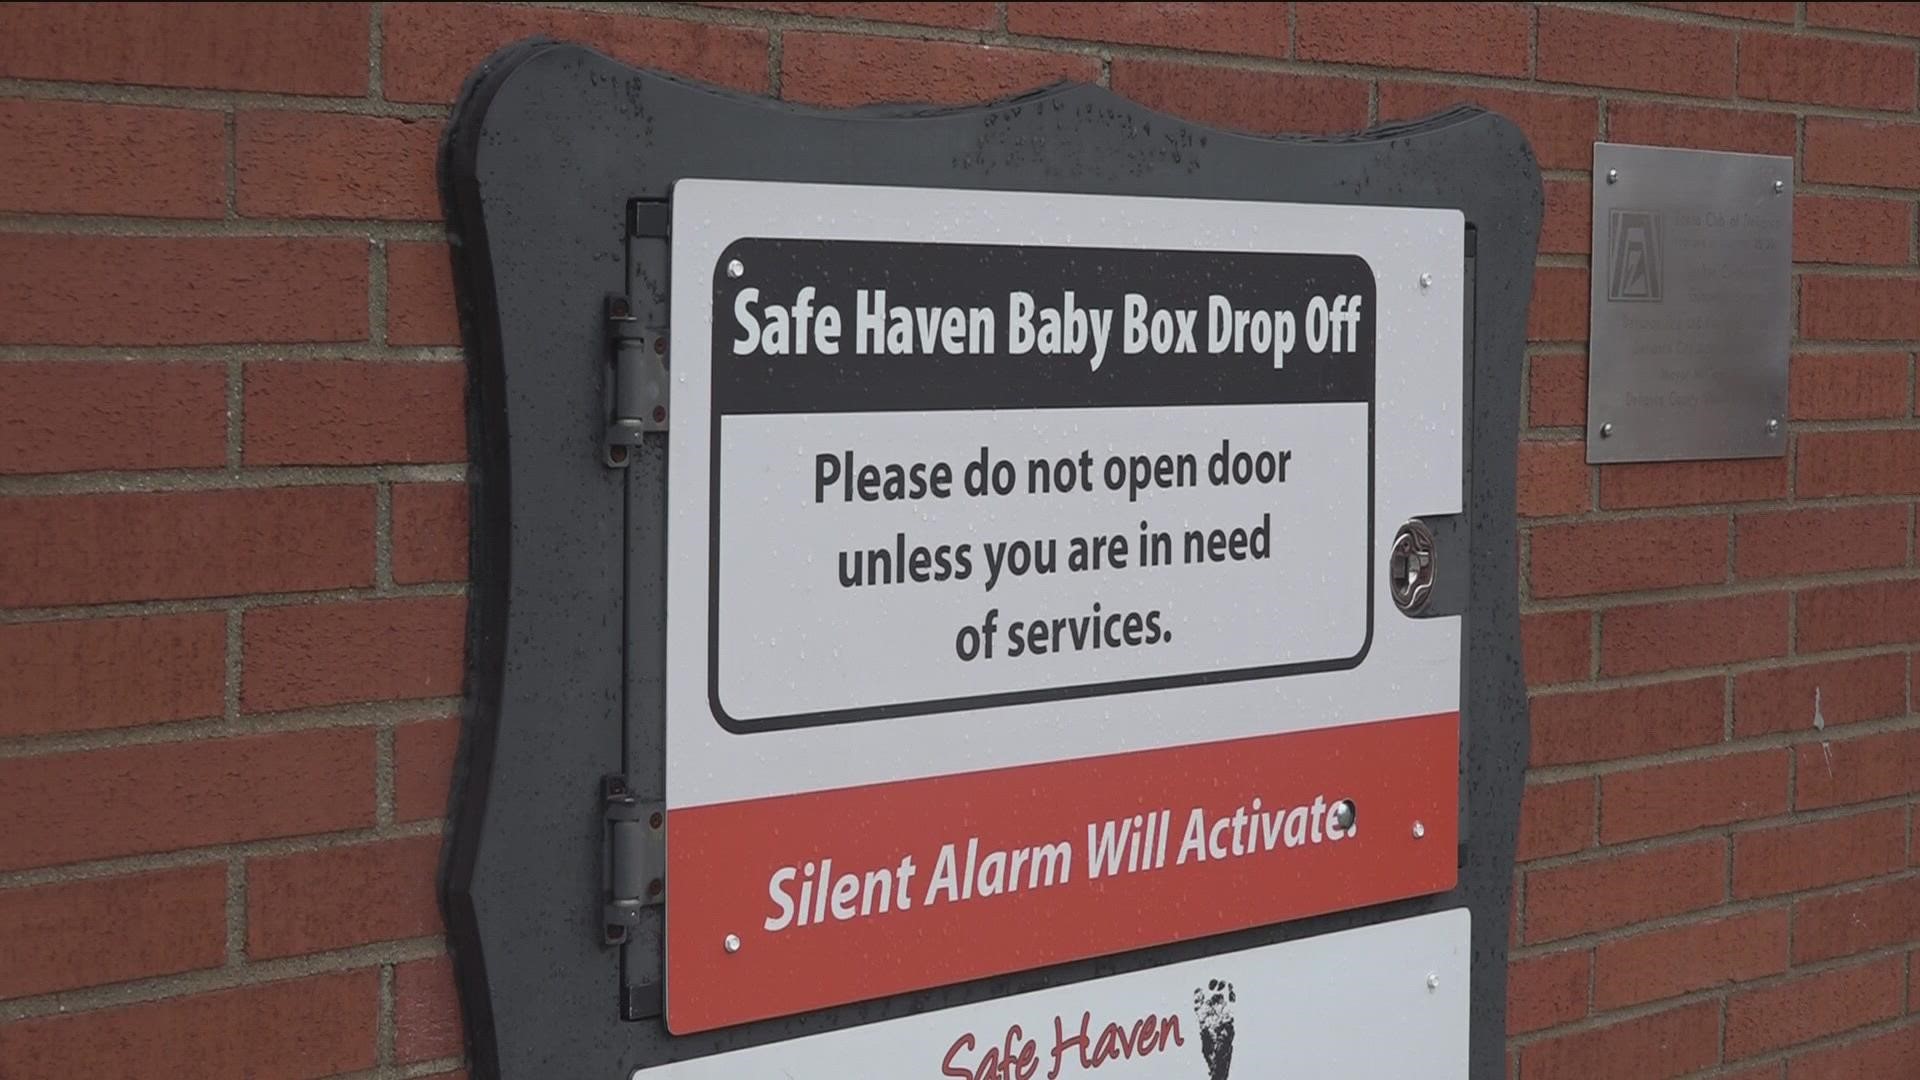 2022 Banquet Proceeds To Go To New Safe Haven Baby Box